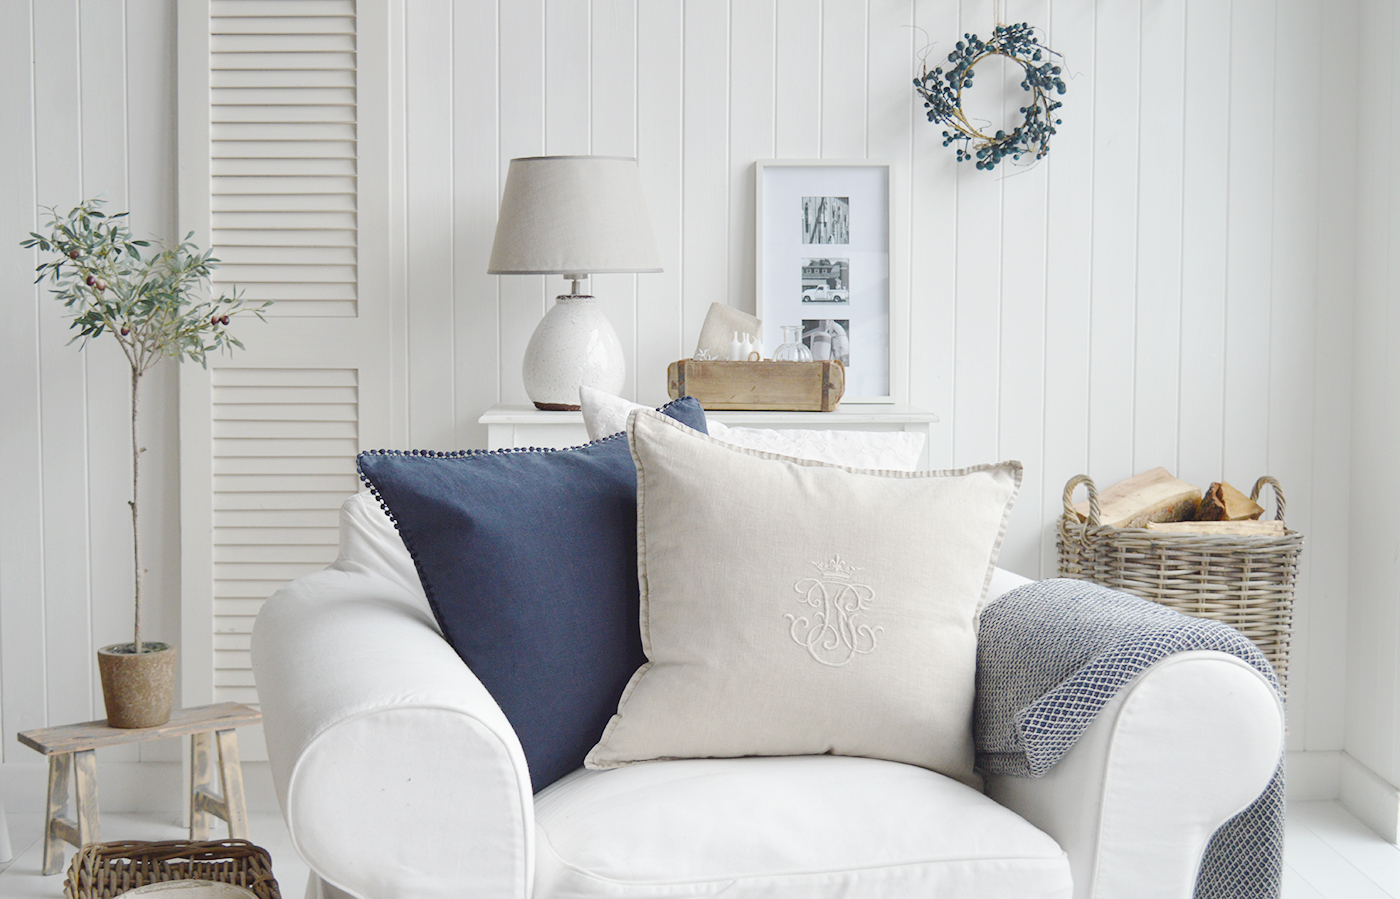 New England style living. Home decor and accessories for modern farmhouse, country and coastal furniture